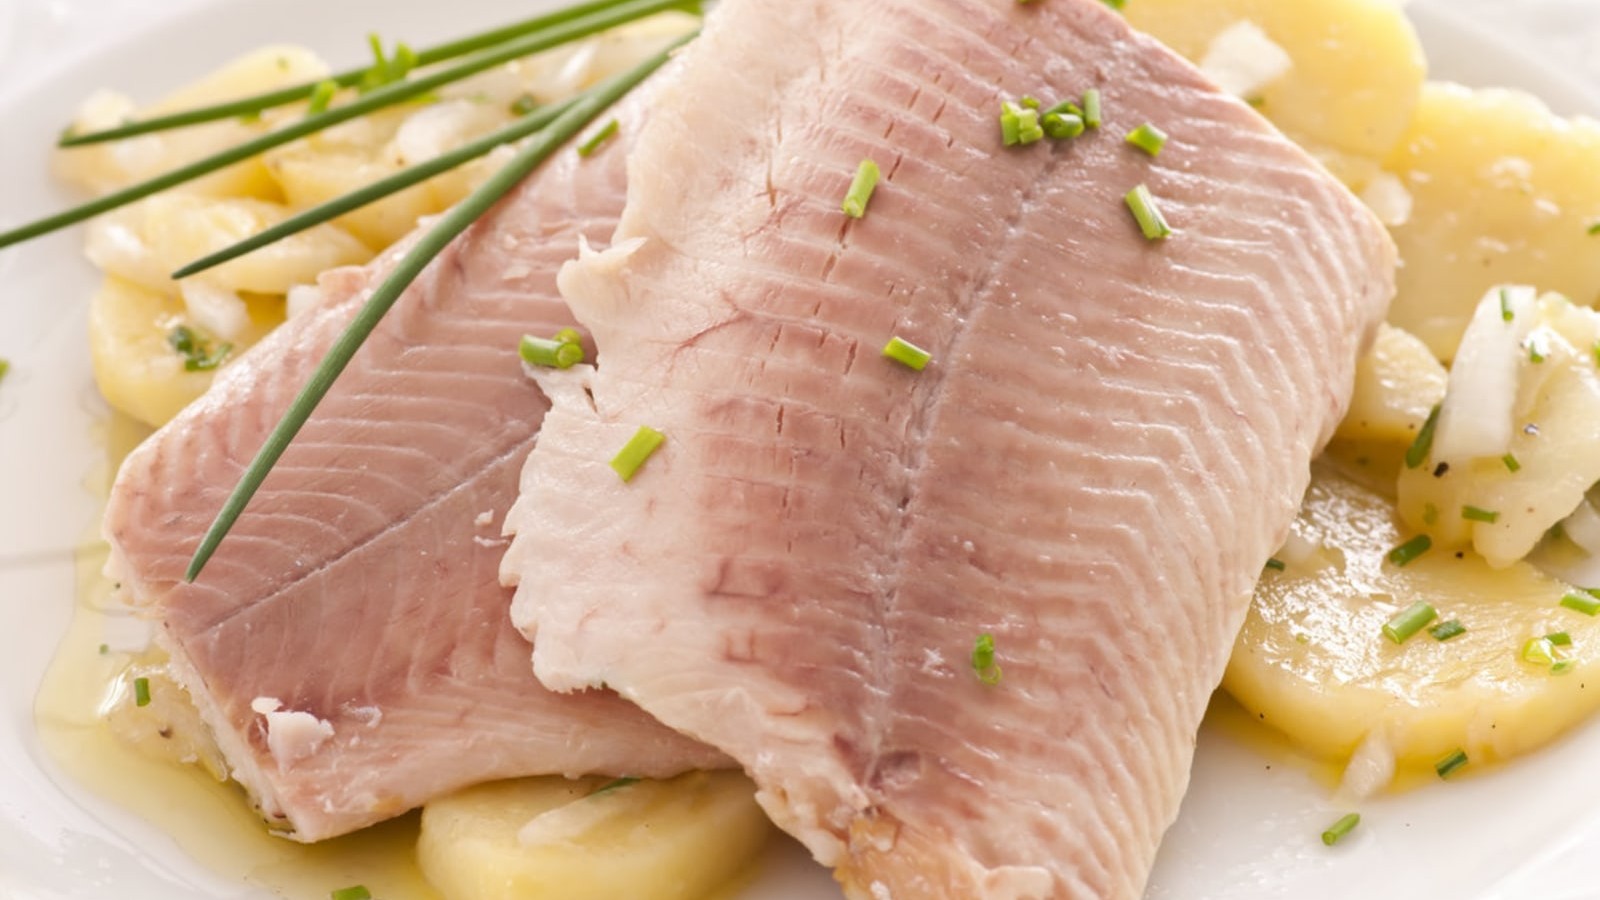 Image of Trout Fillet with Potato Salad